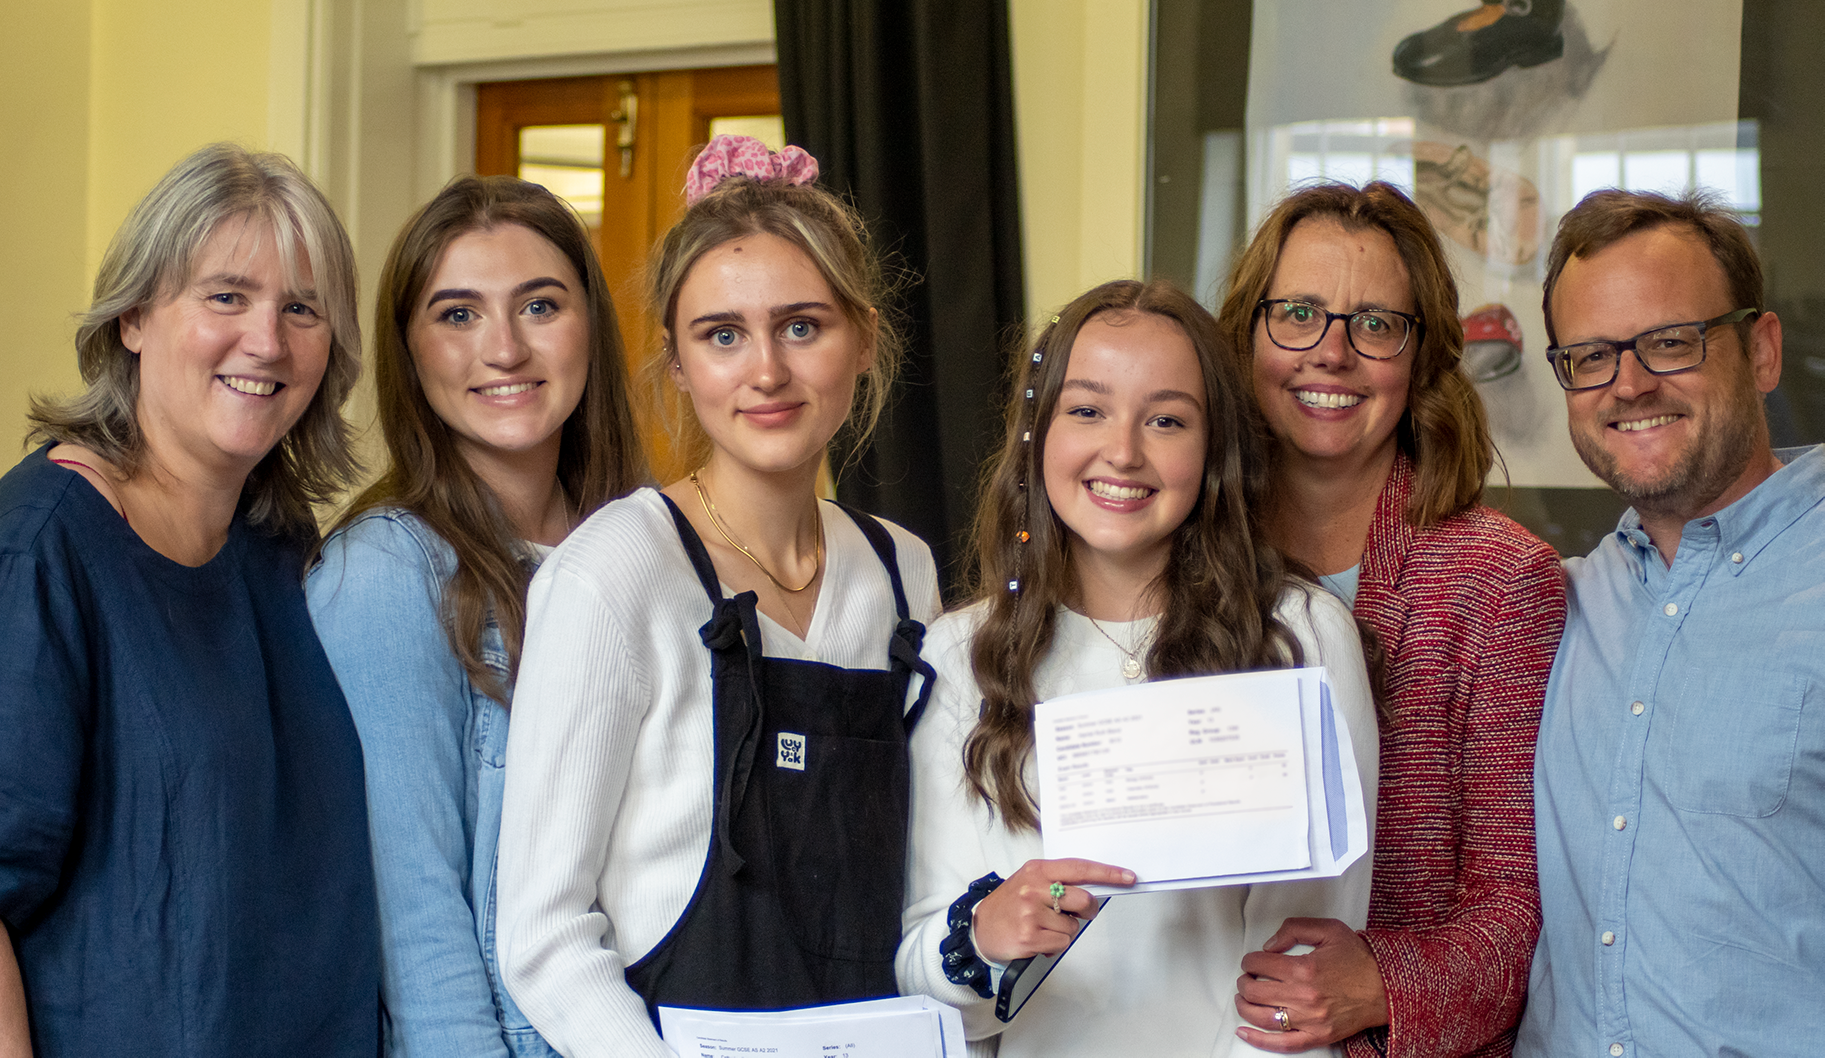 The Bland and Cooney families celebrating their daughters' results - Catherine Cooney is studying Marketing at Bristol, and Harriet Bland is studying Medicine at Oxford